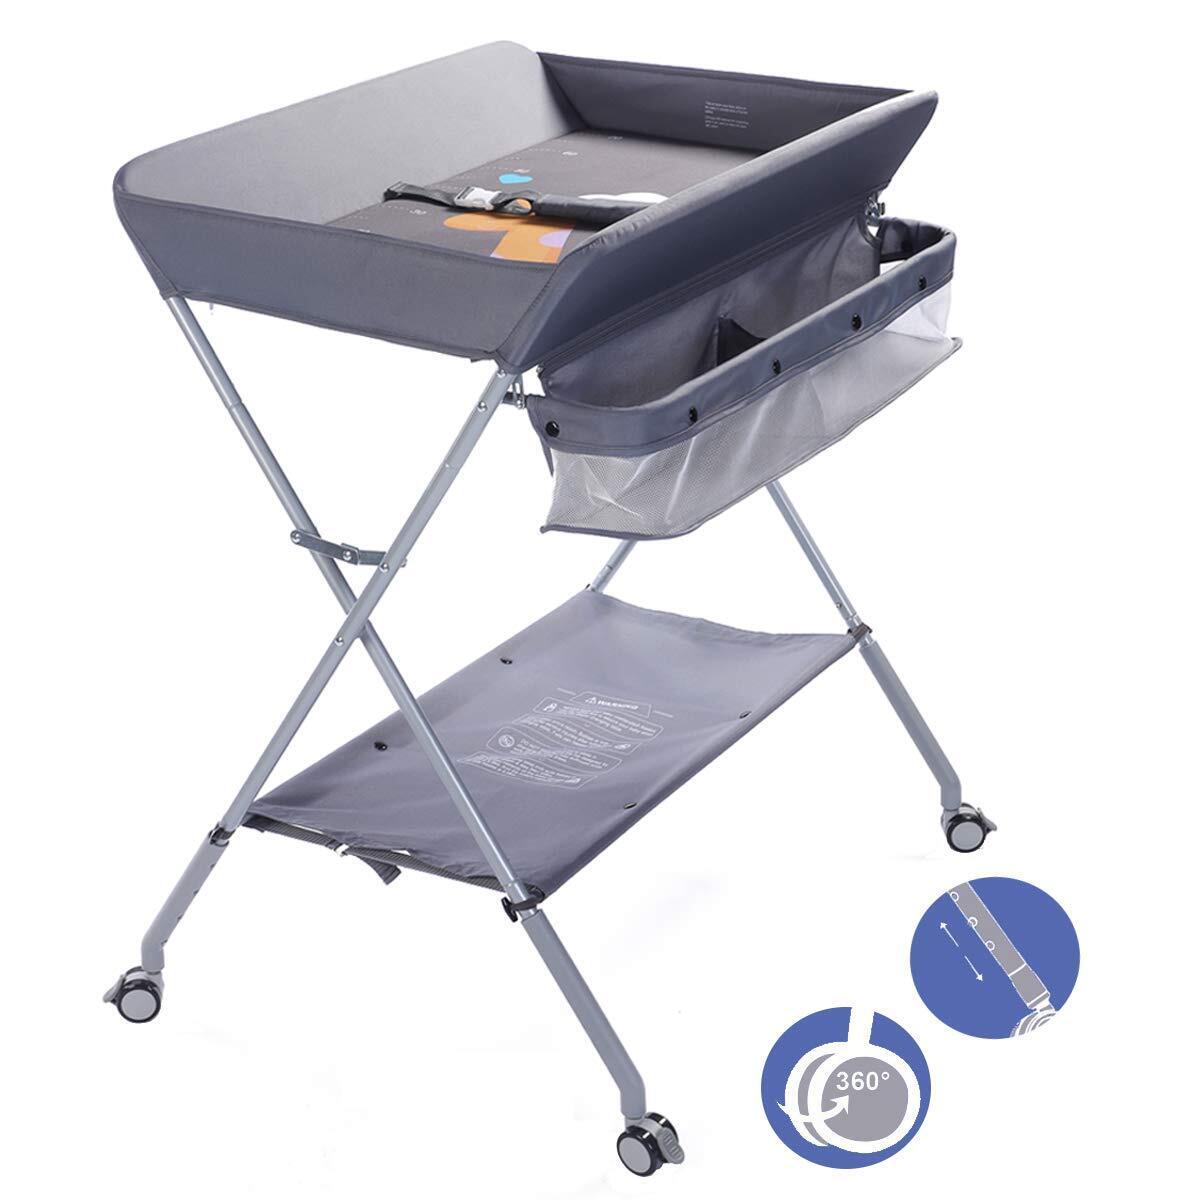 Fold Down Changing Table With Baskets